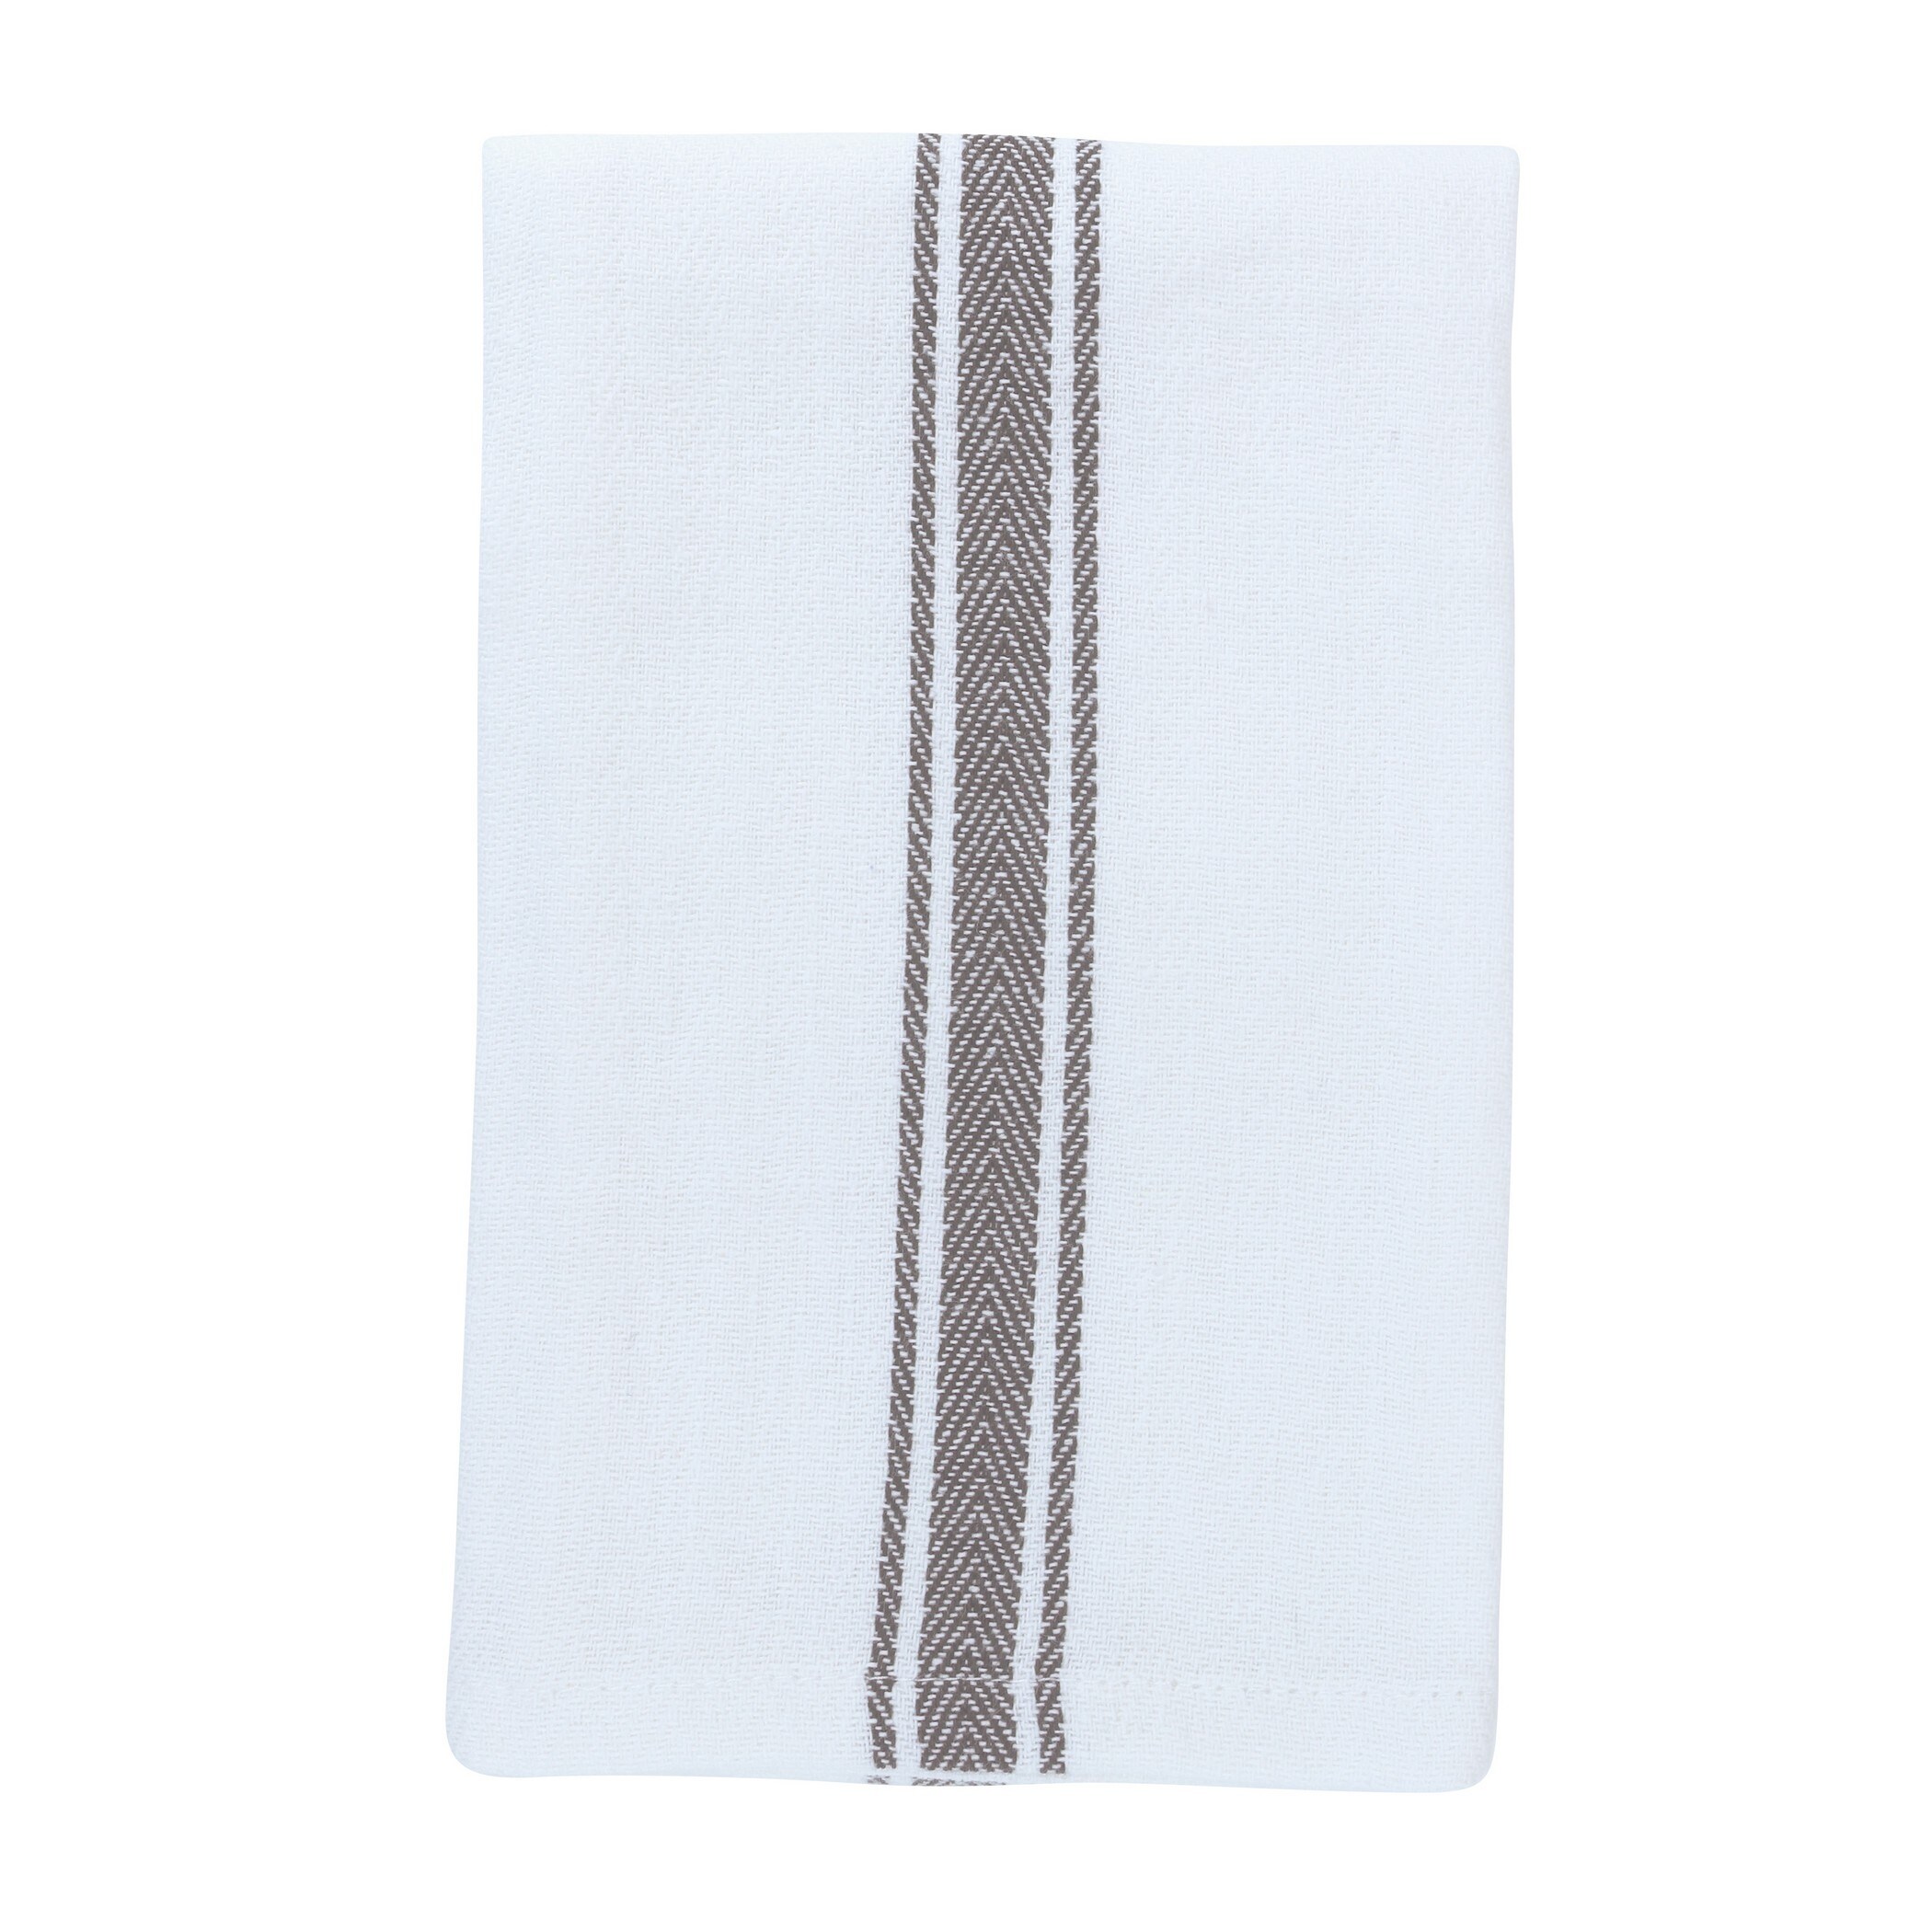 Sloppy Chef Herringbone Kitchen Tea Towels - (Pack of 12) 100% Cotton  Dishcloth, Absorbent, Quick Dry Dish Drying Towel, 15 x 25